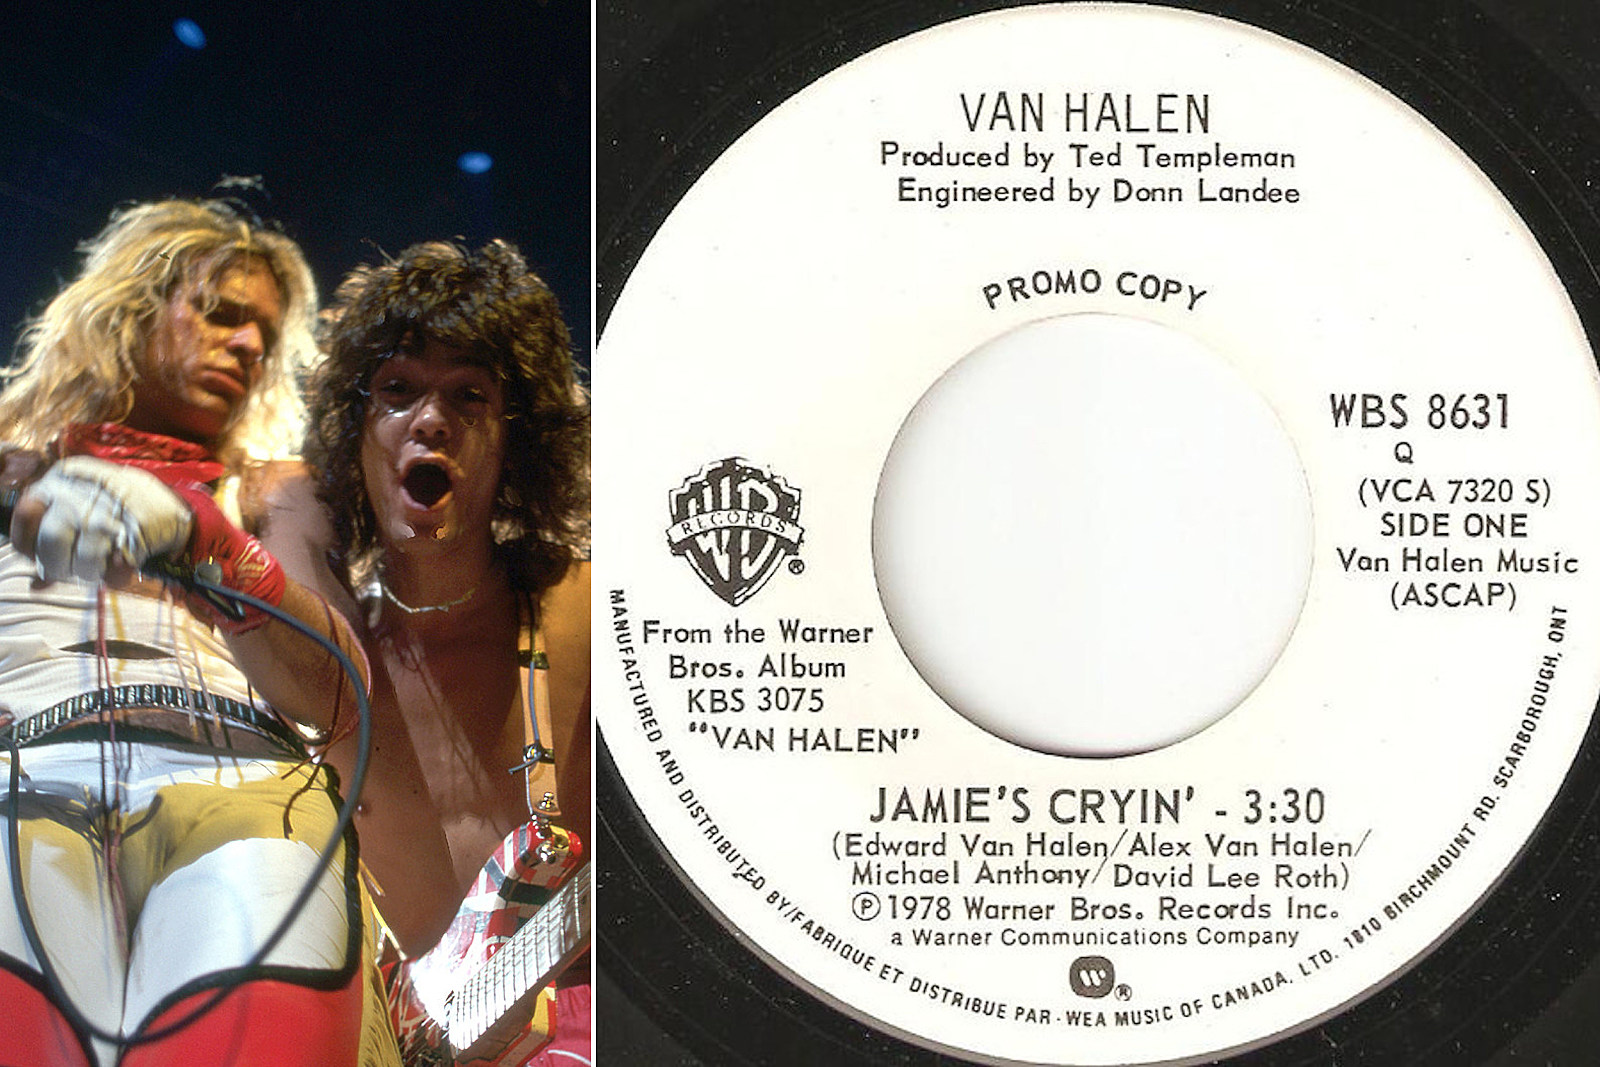 How a Burger and a Joint Helped Van Halen Make ‘Jamie’s Cryin”